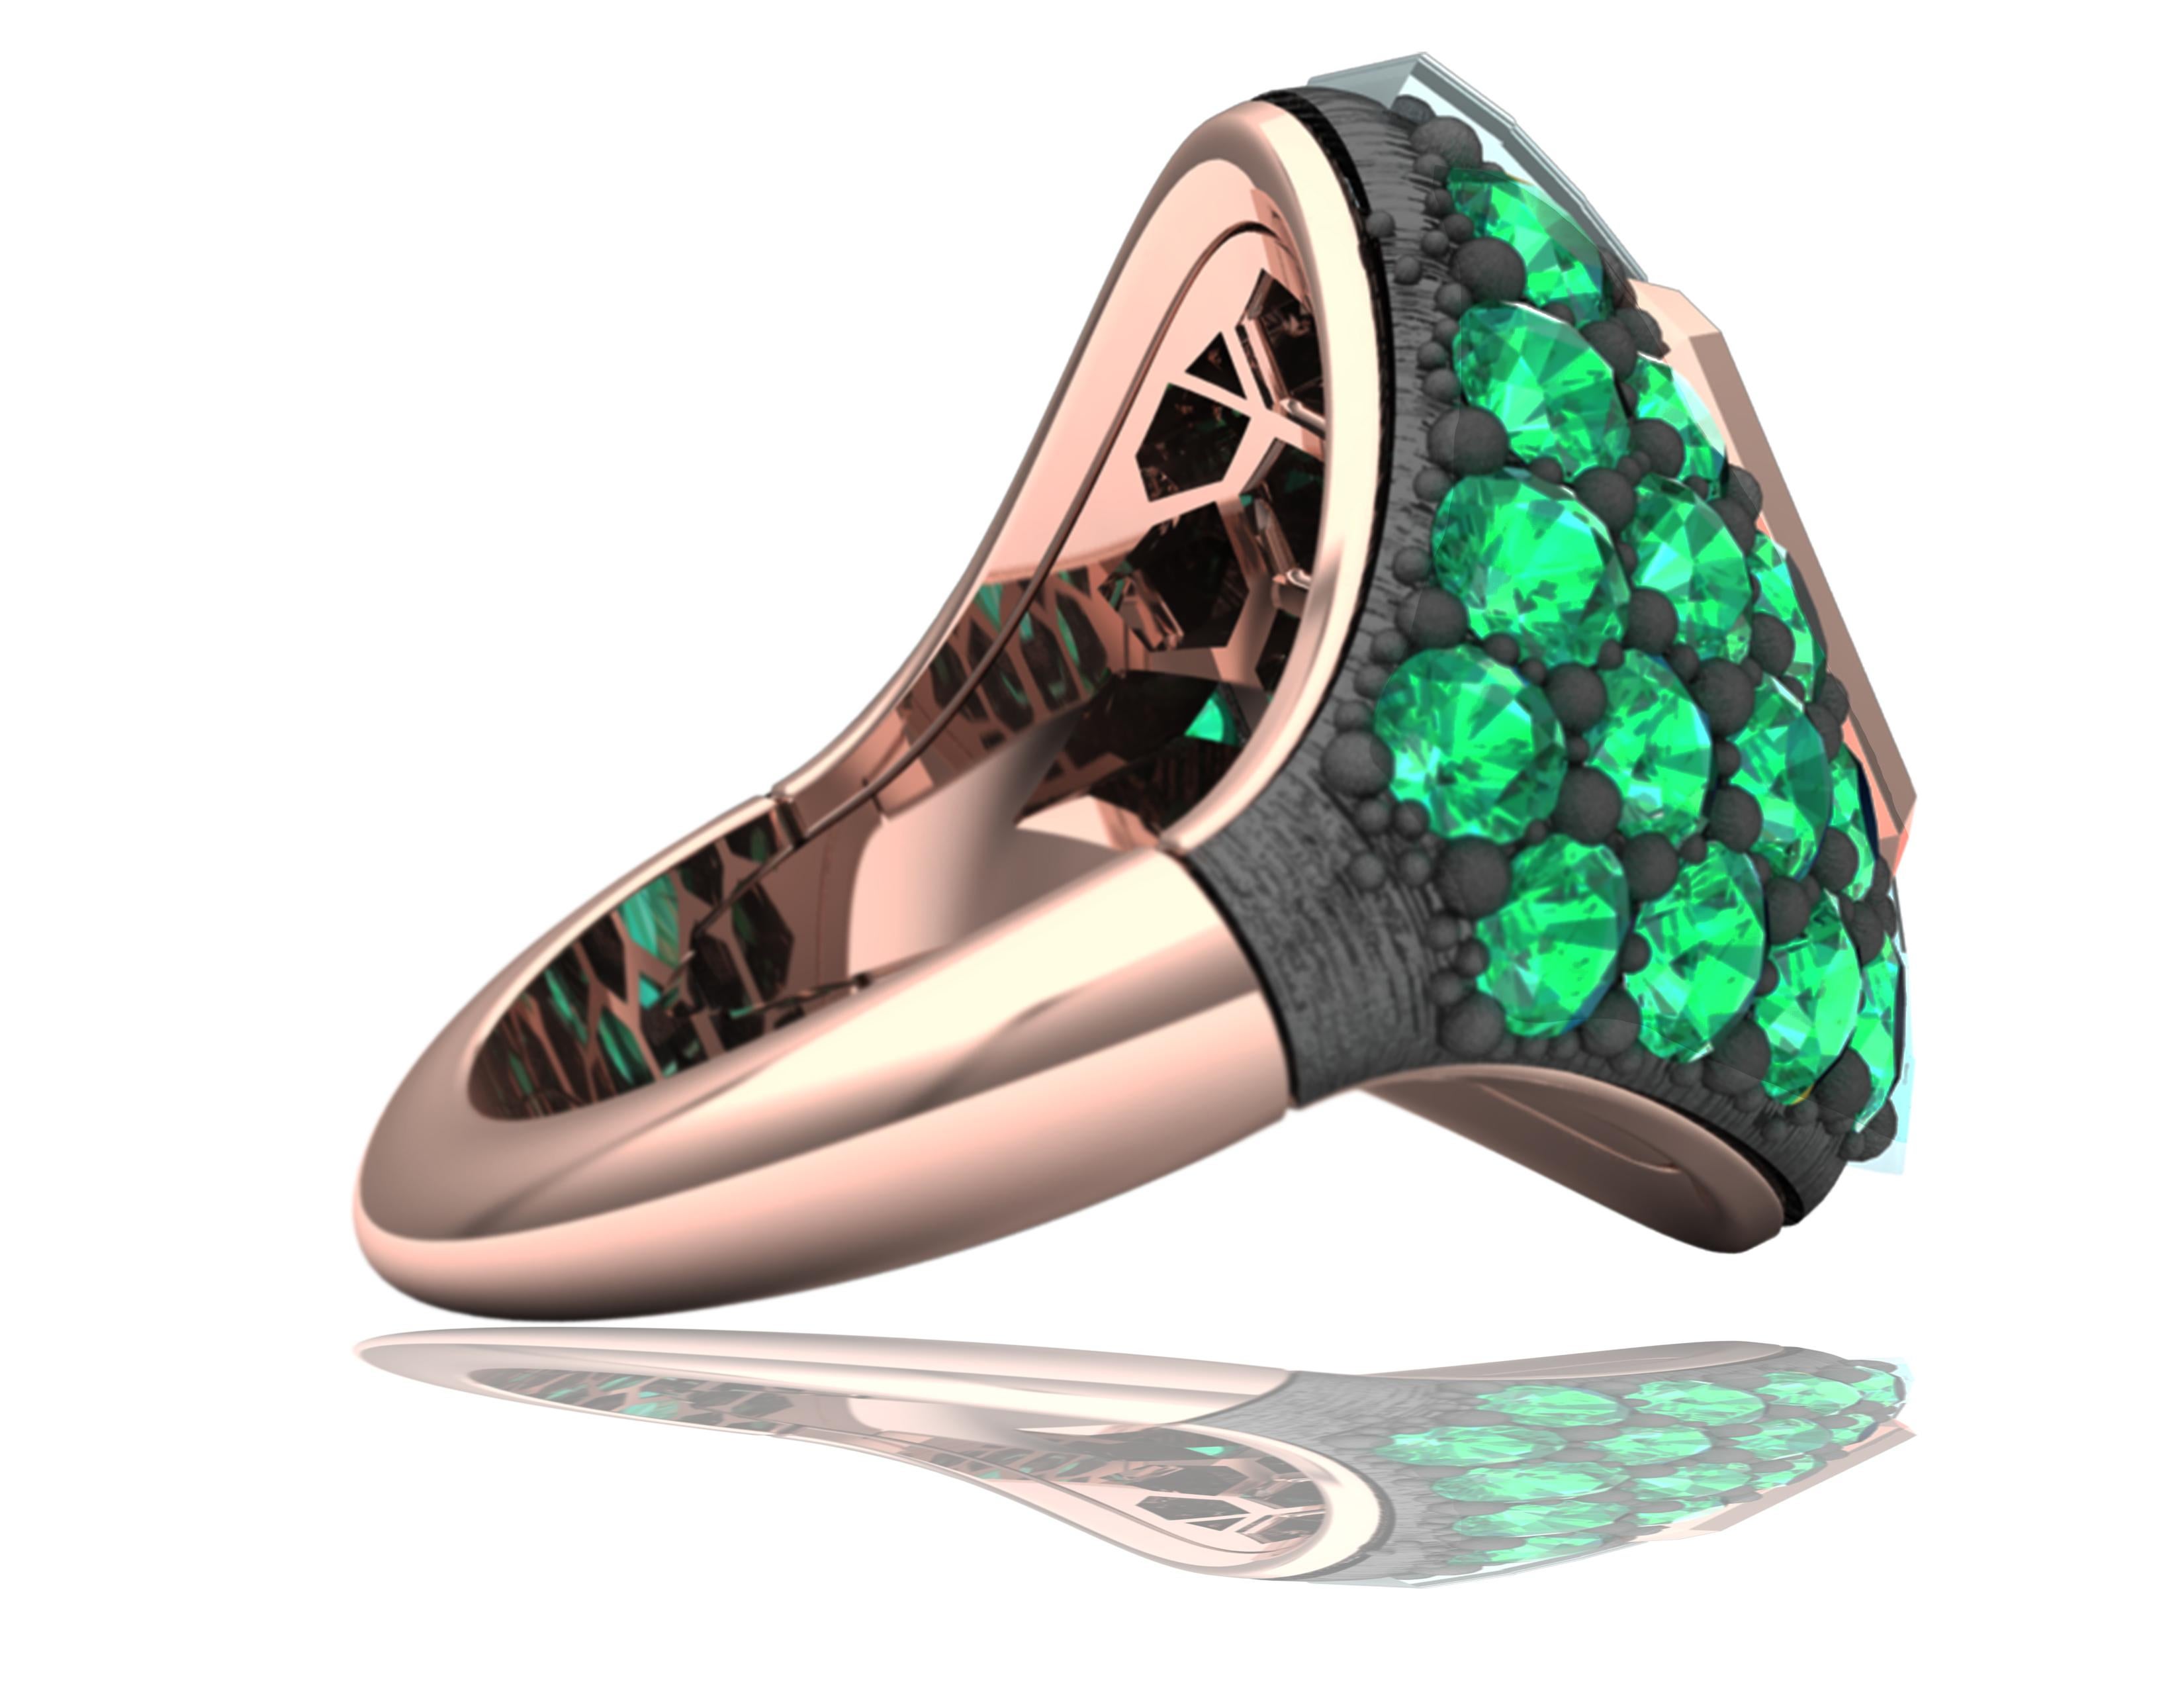 A green tapestry of gorgeous emeralds in varying sizes, shades, and brilliance, this ring has a radiant cut Emerald centered, which is light greenish-blue in color and bezel set in rose gold.  The center stone has over 2 carats of rich green